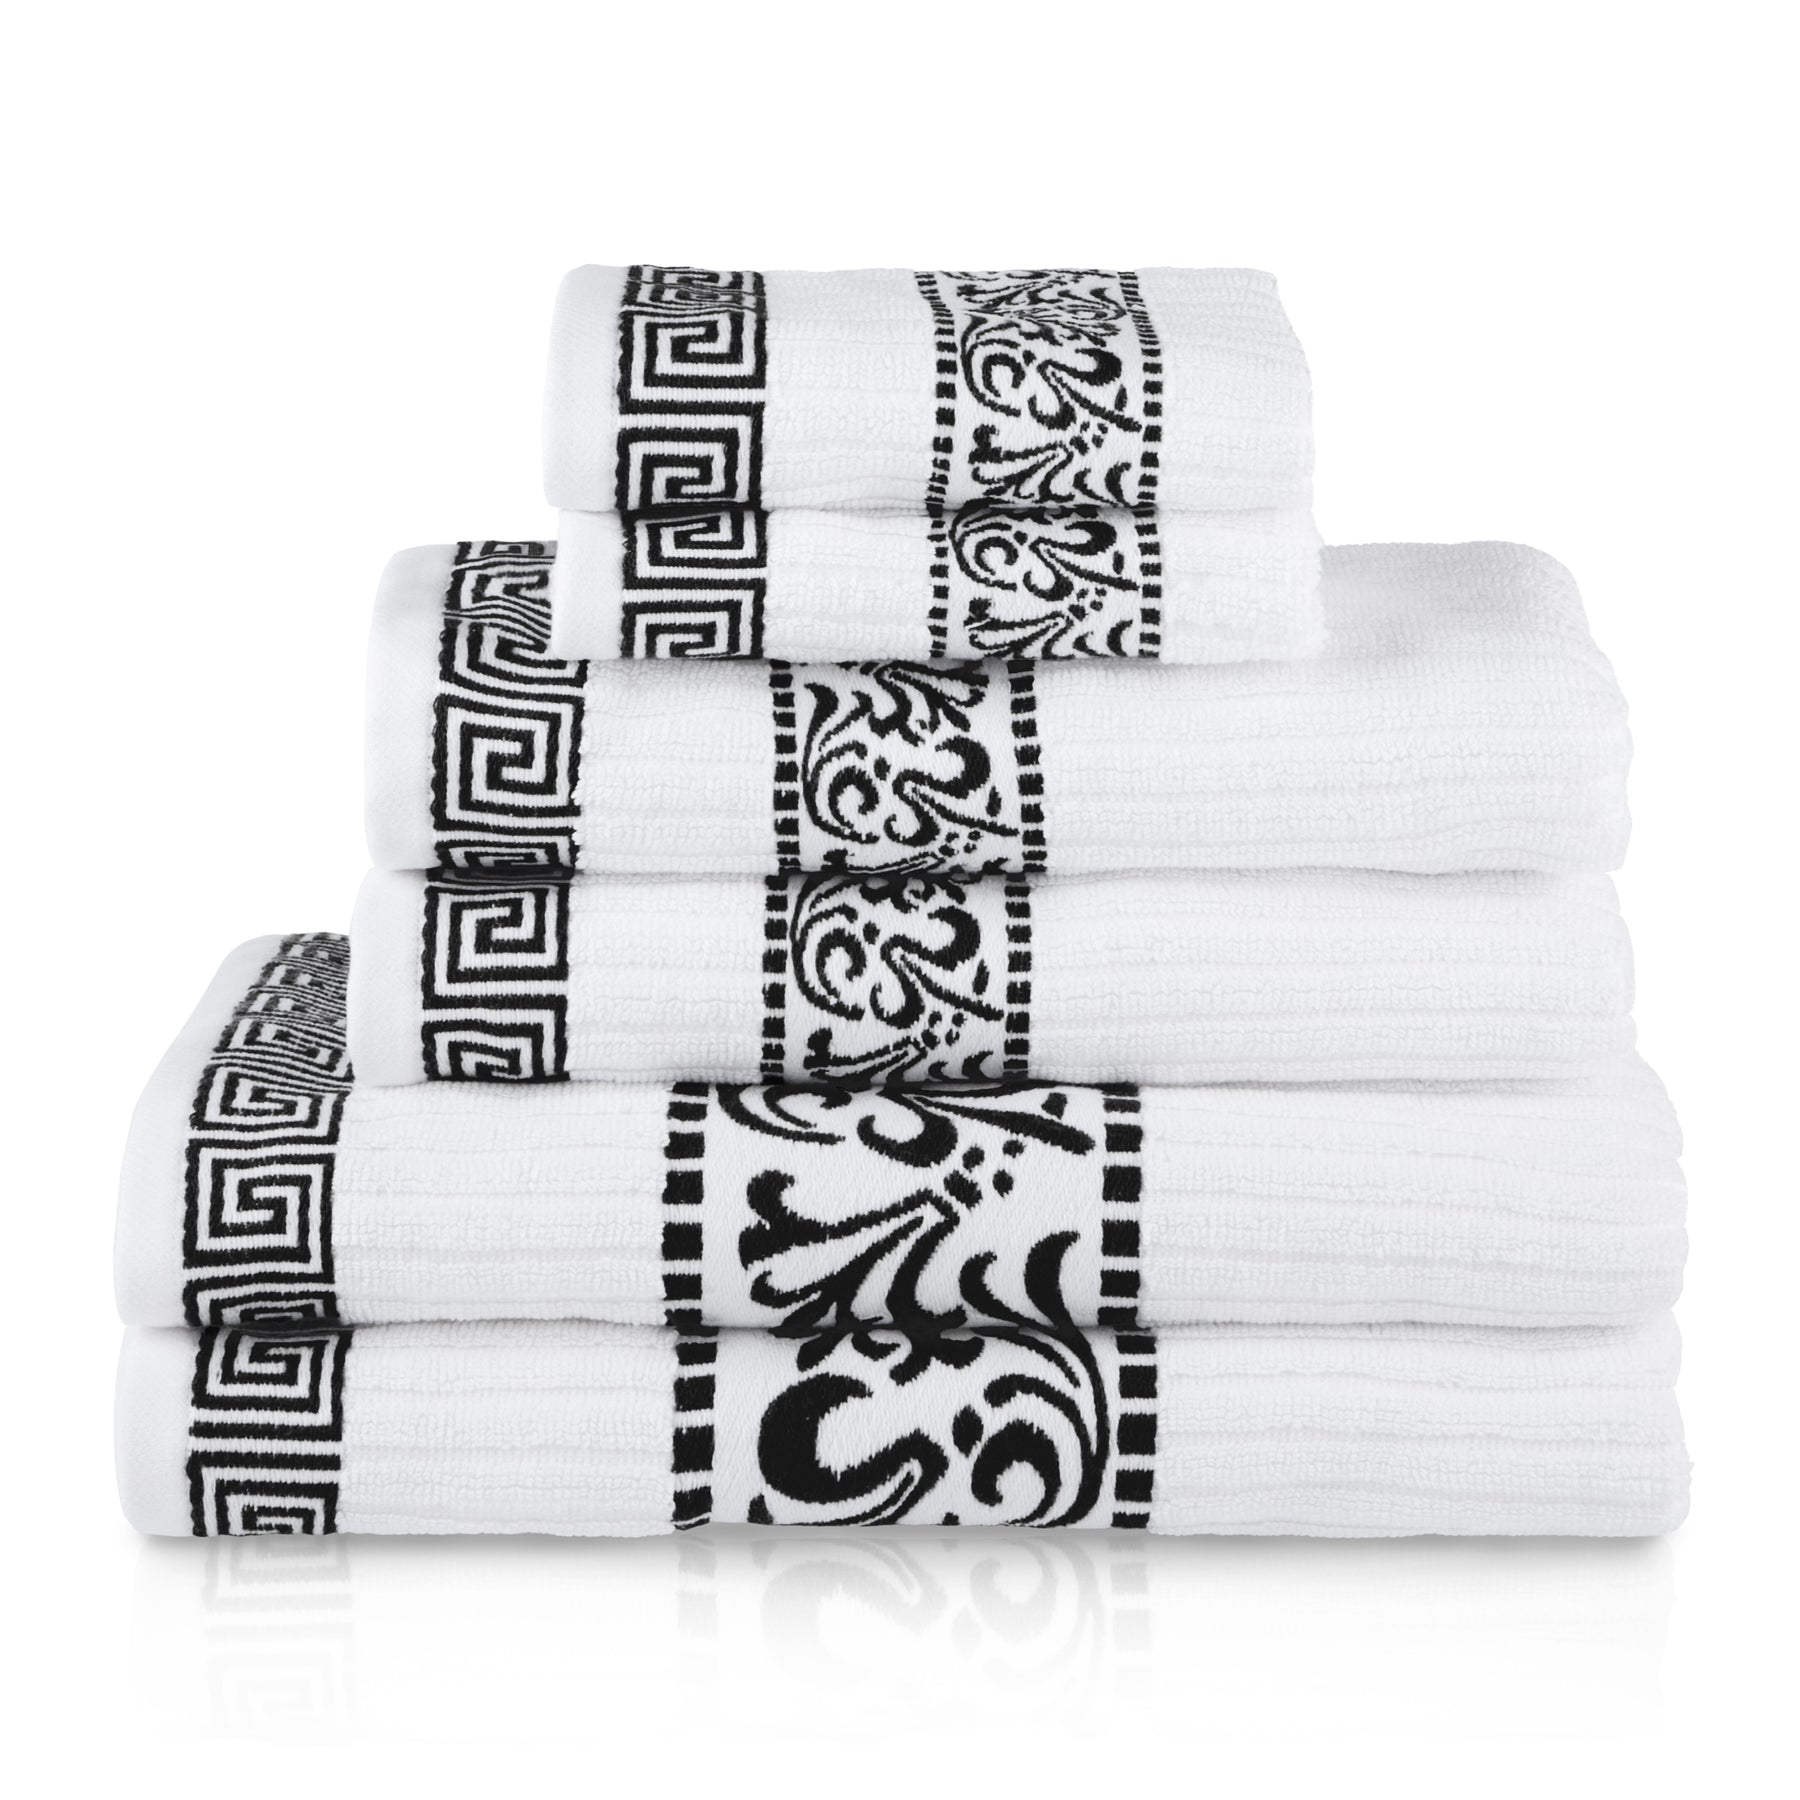 Superior Athens Cotton 6-Piece Assorted Towel Set with Greek Scroll and Floral Pattern -Black